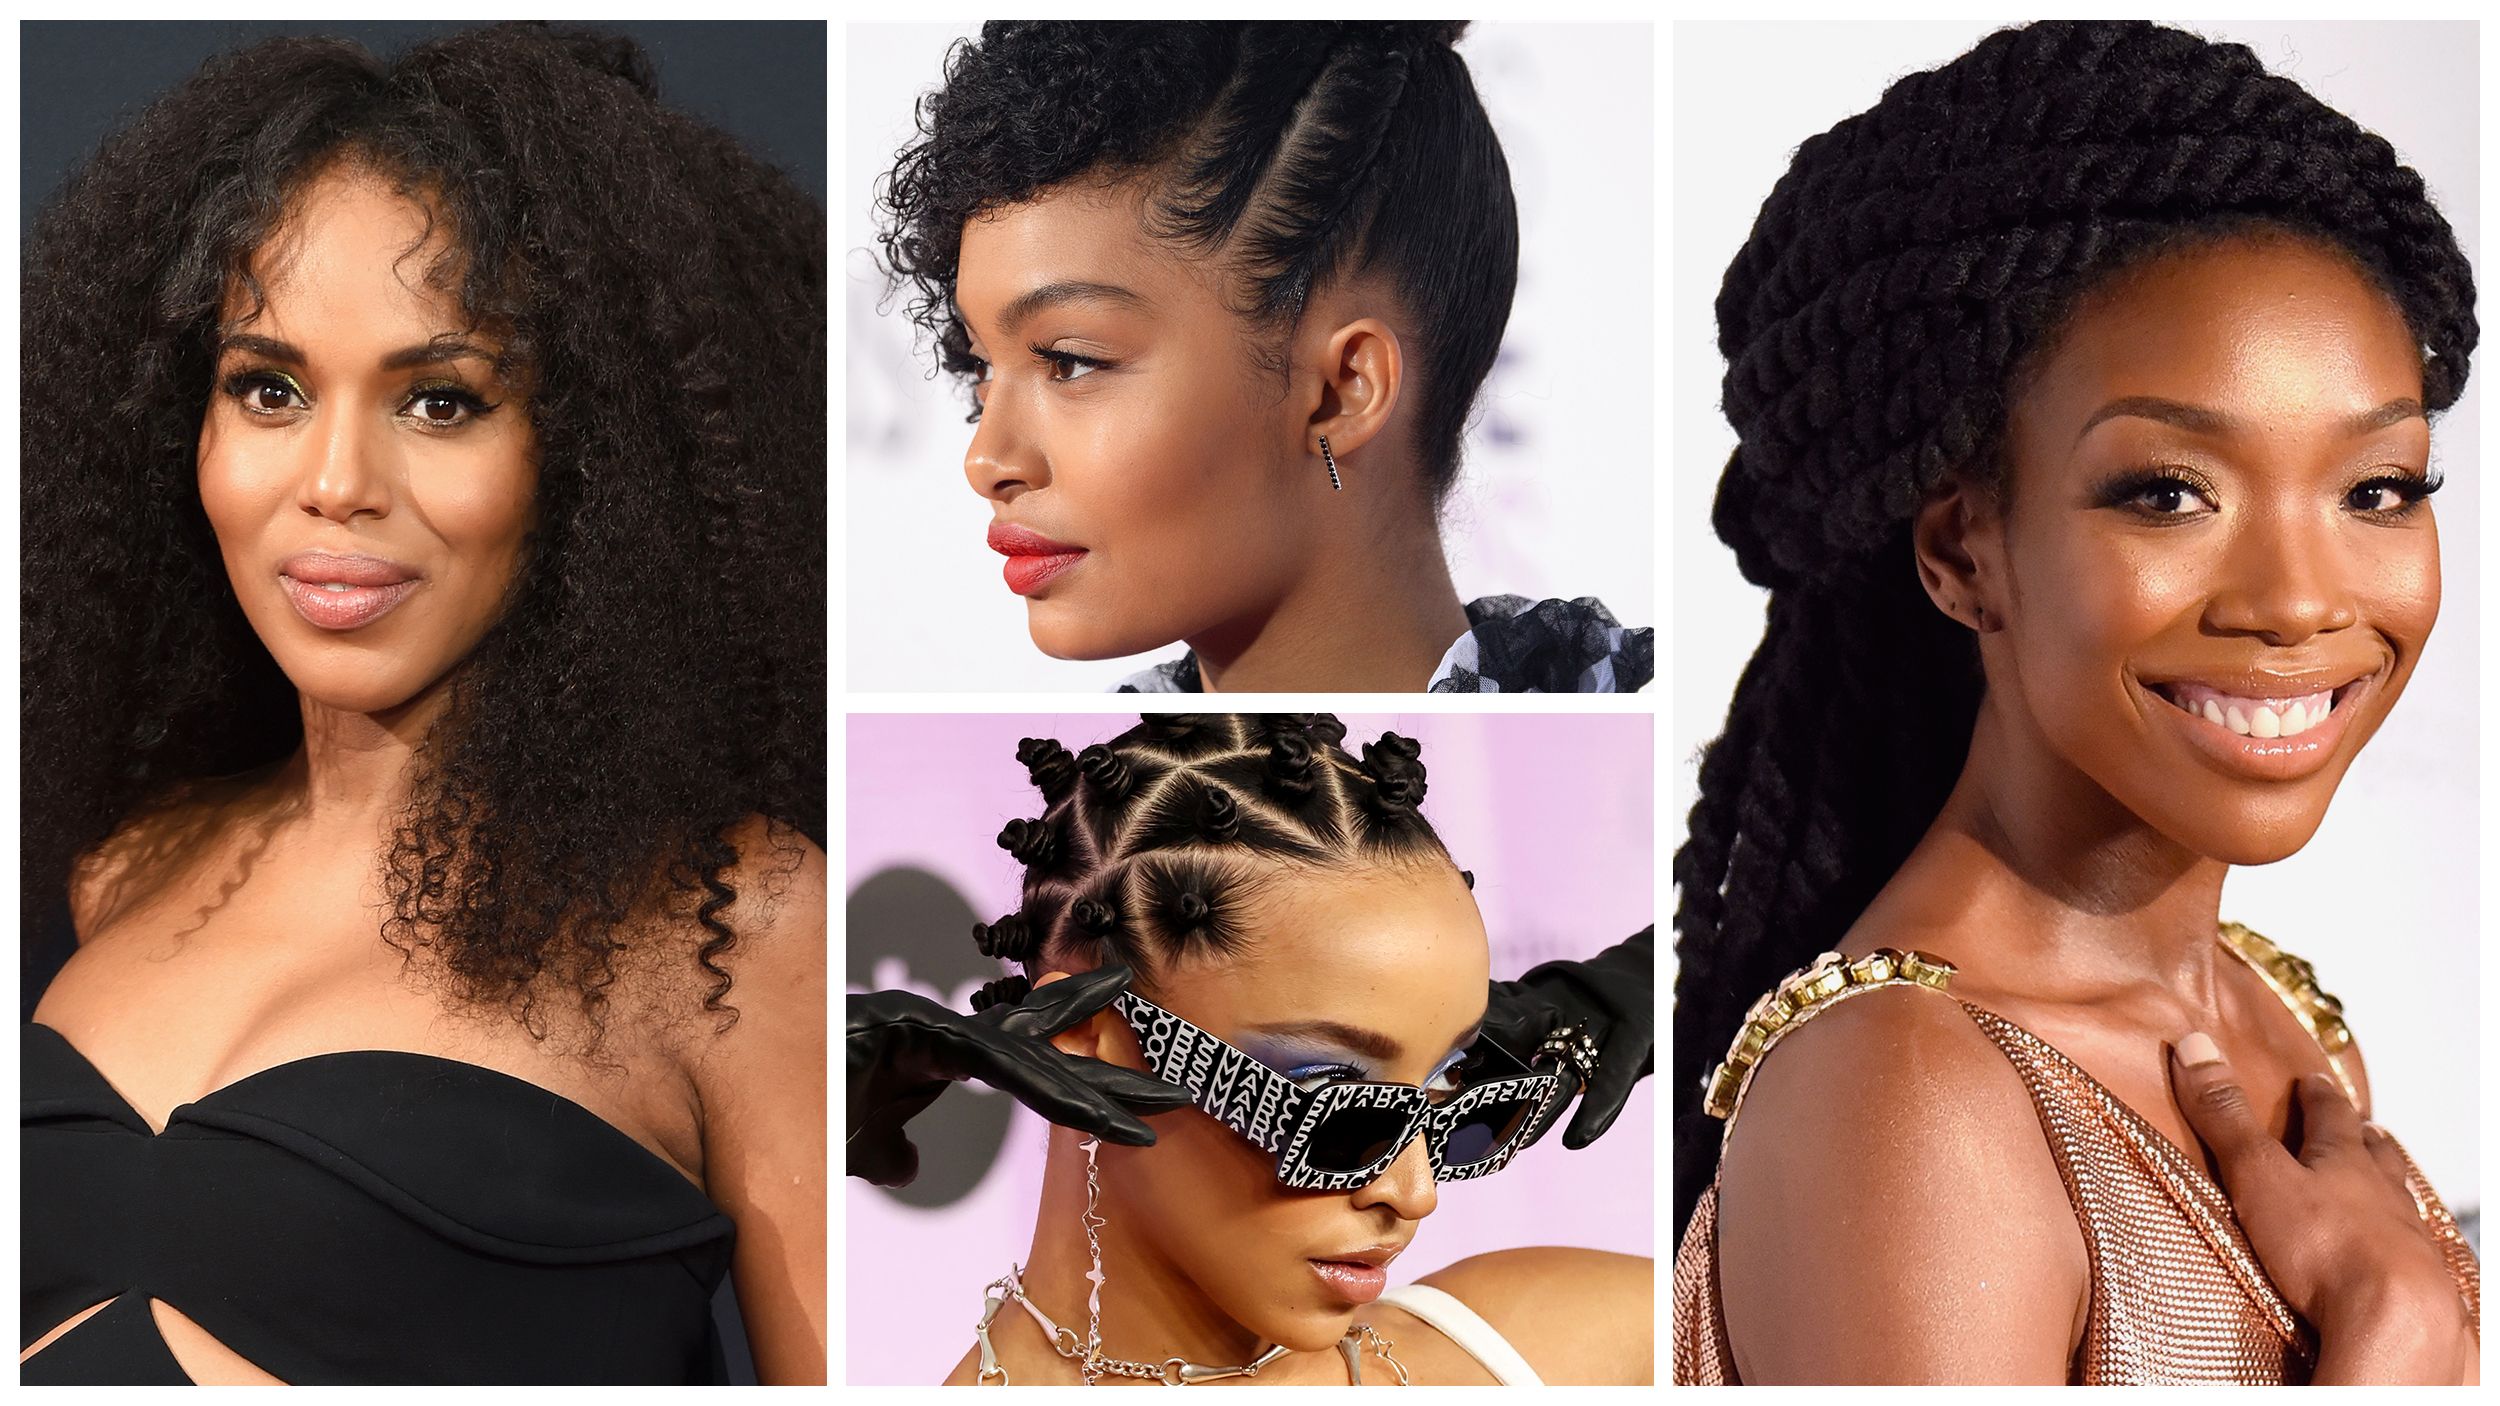 7 90s Hairstyles for Black Women - Natural Hair Ideas for Halloween